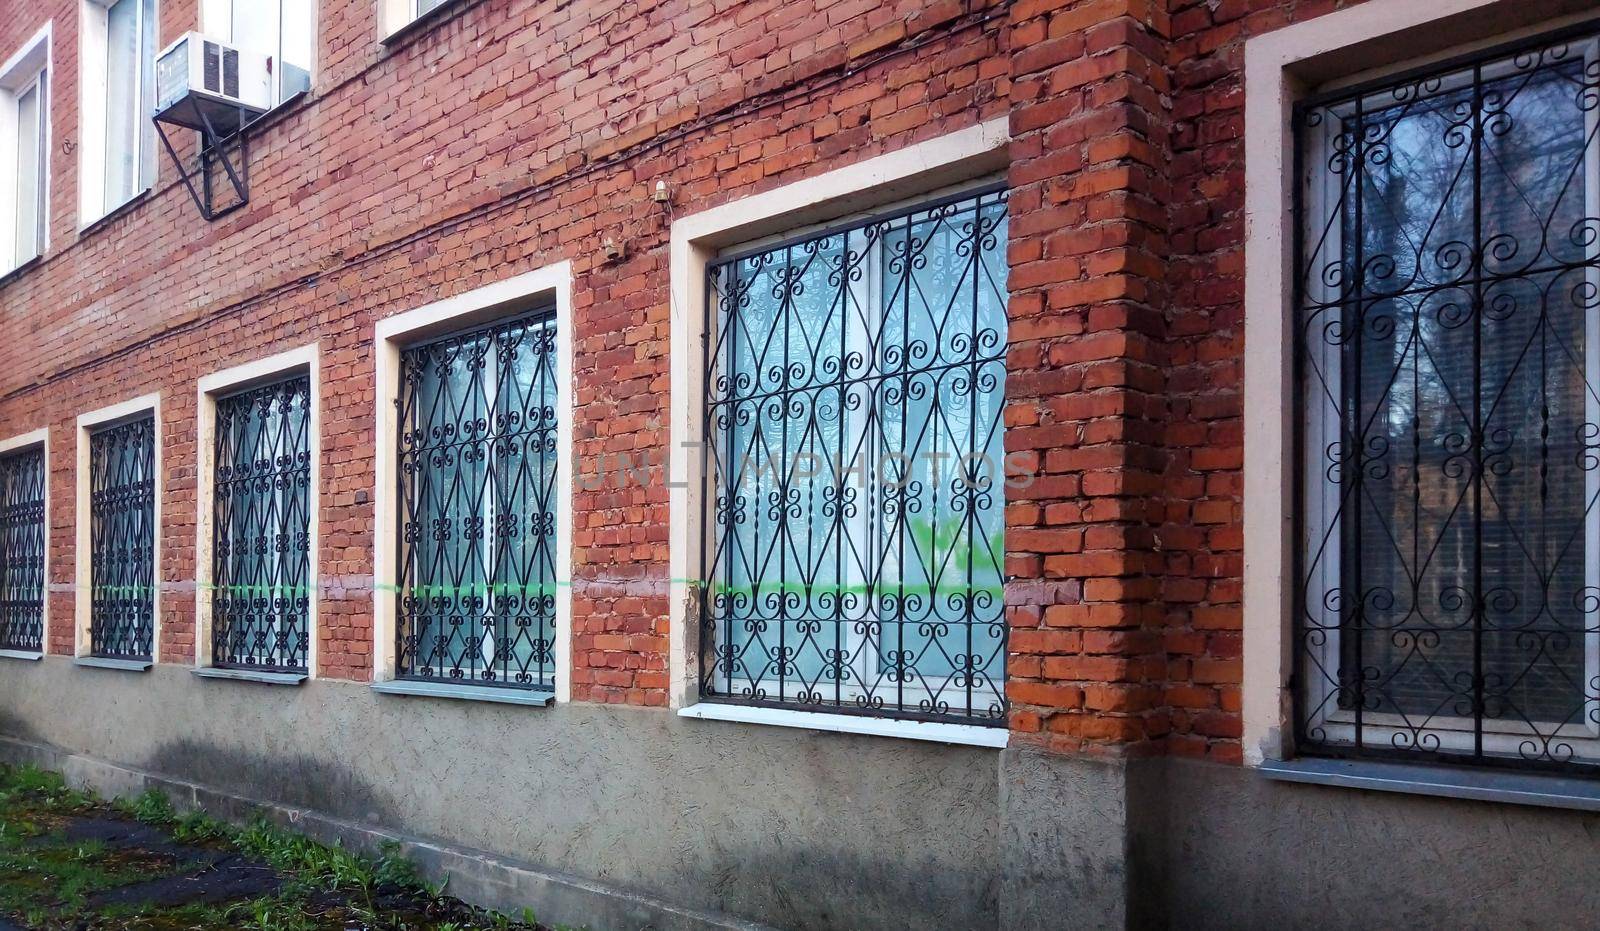 Wrought iron patterned grilles are installed outside on the first floor windows of the apartment building for safety by lapushka62